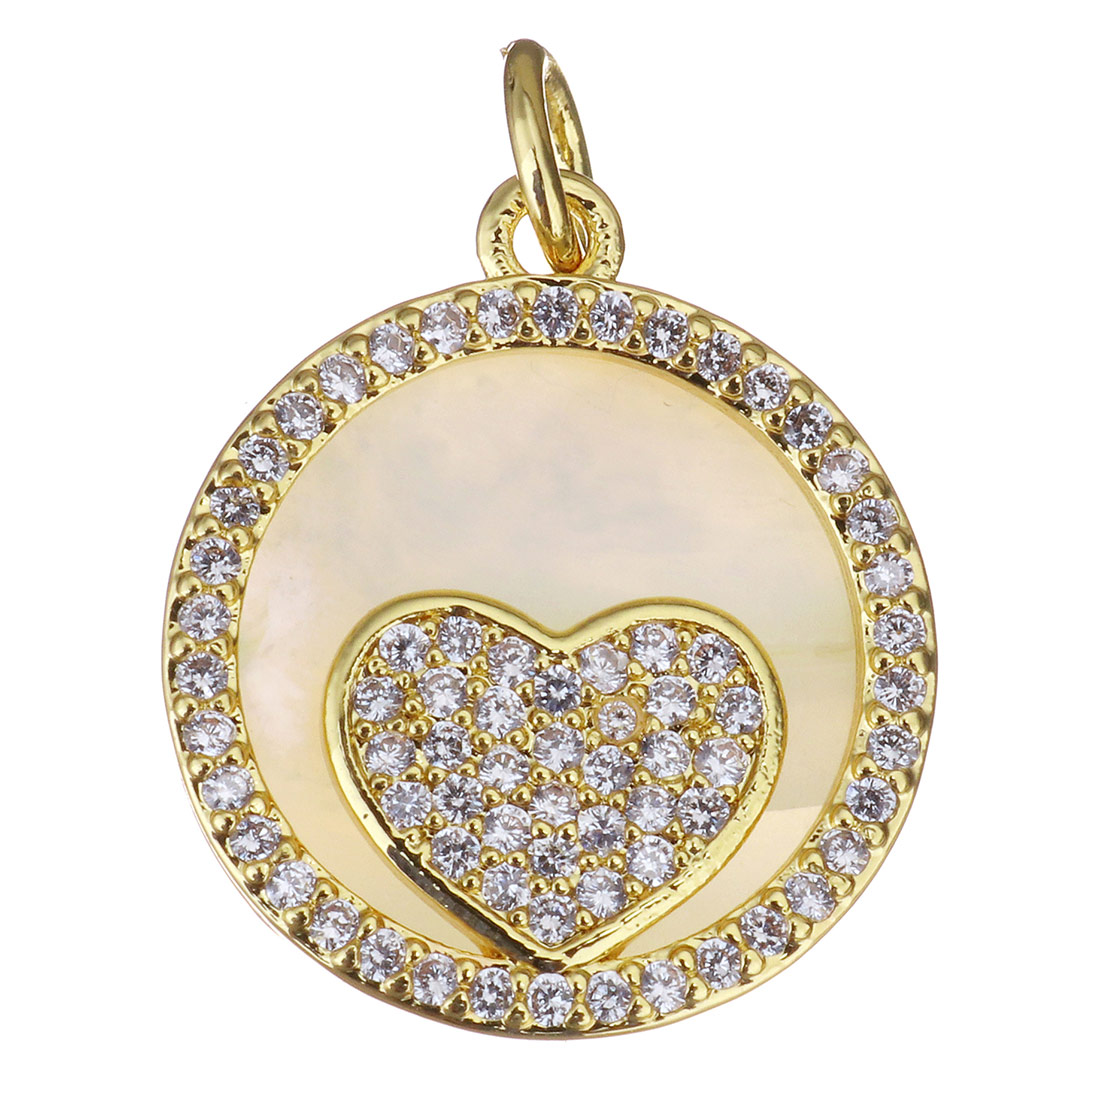  gold color with crystal cubic zirconia